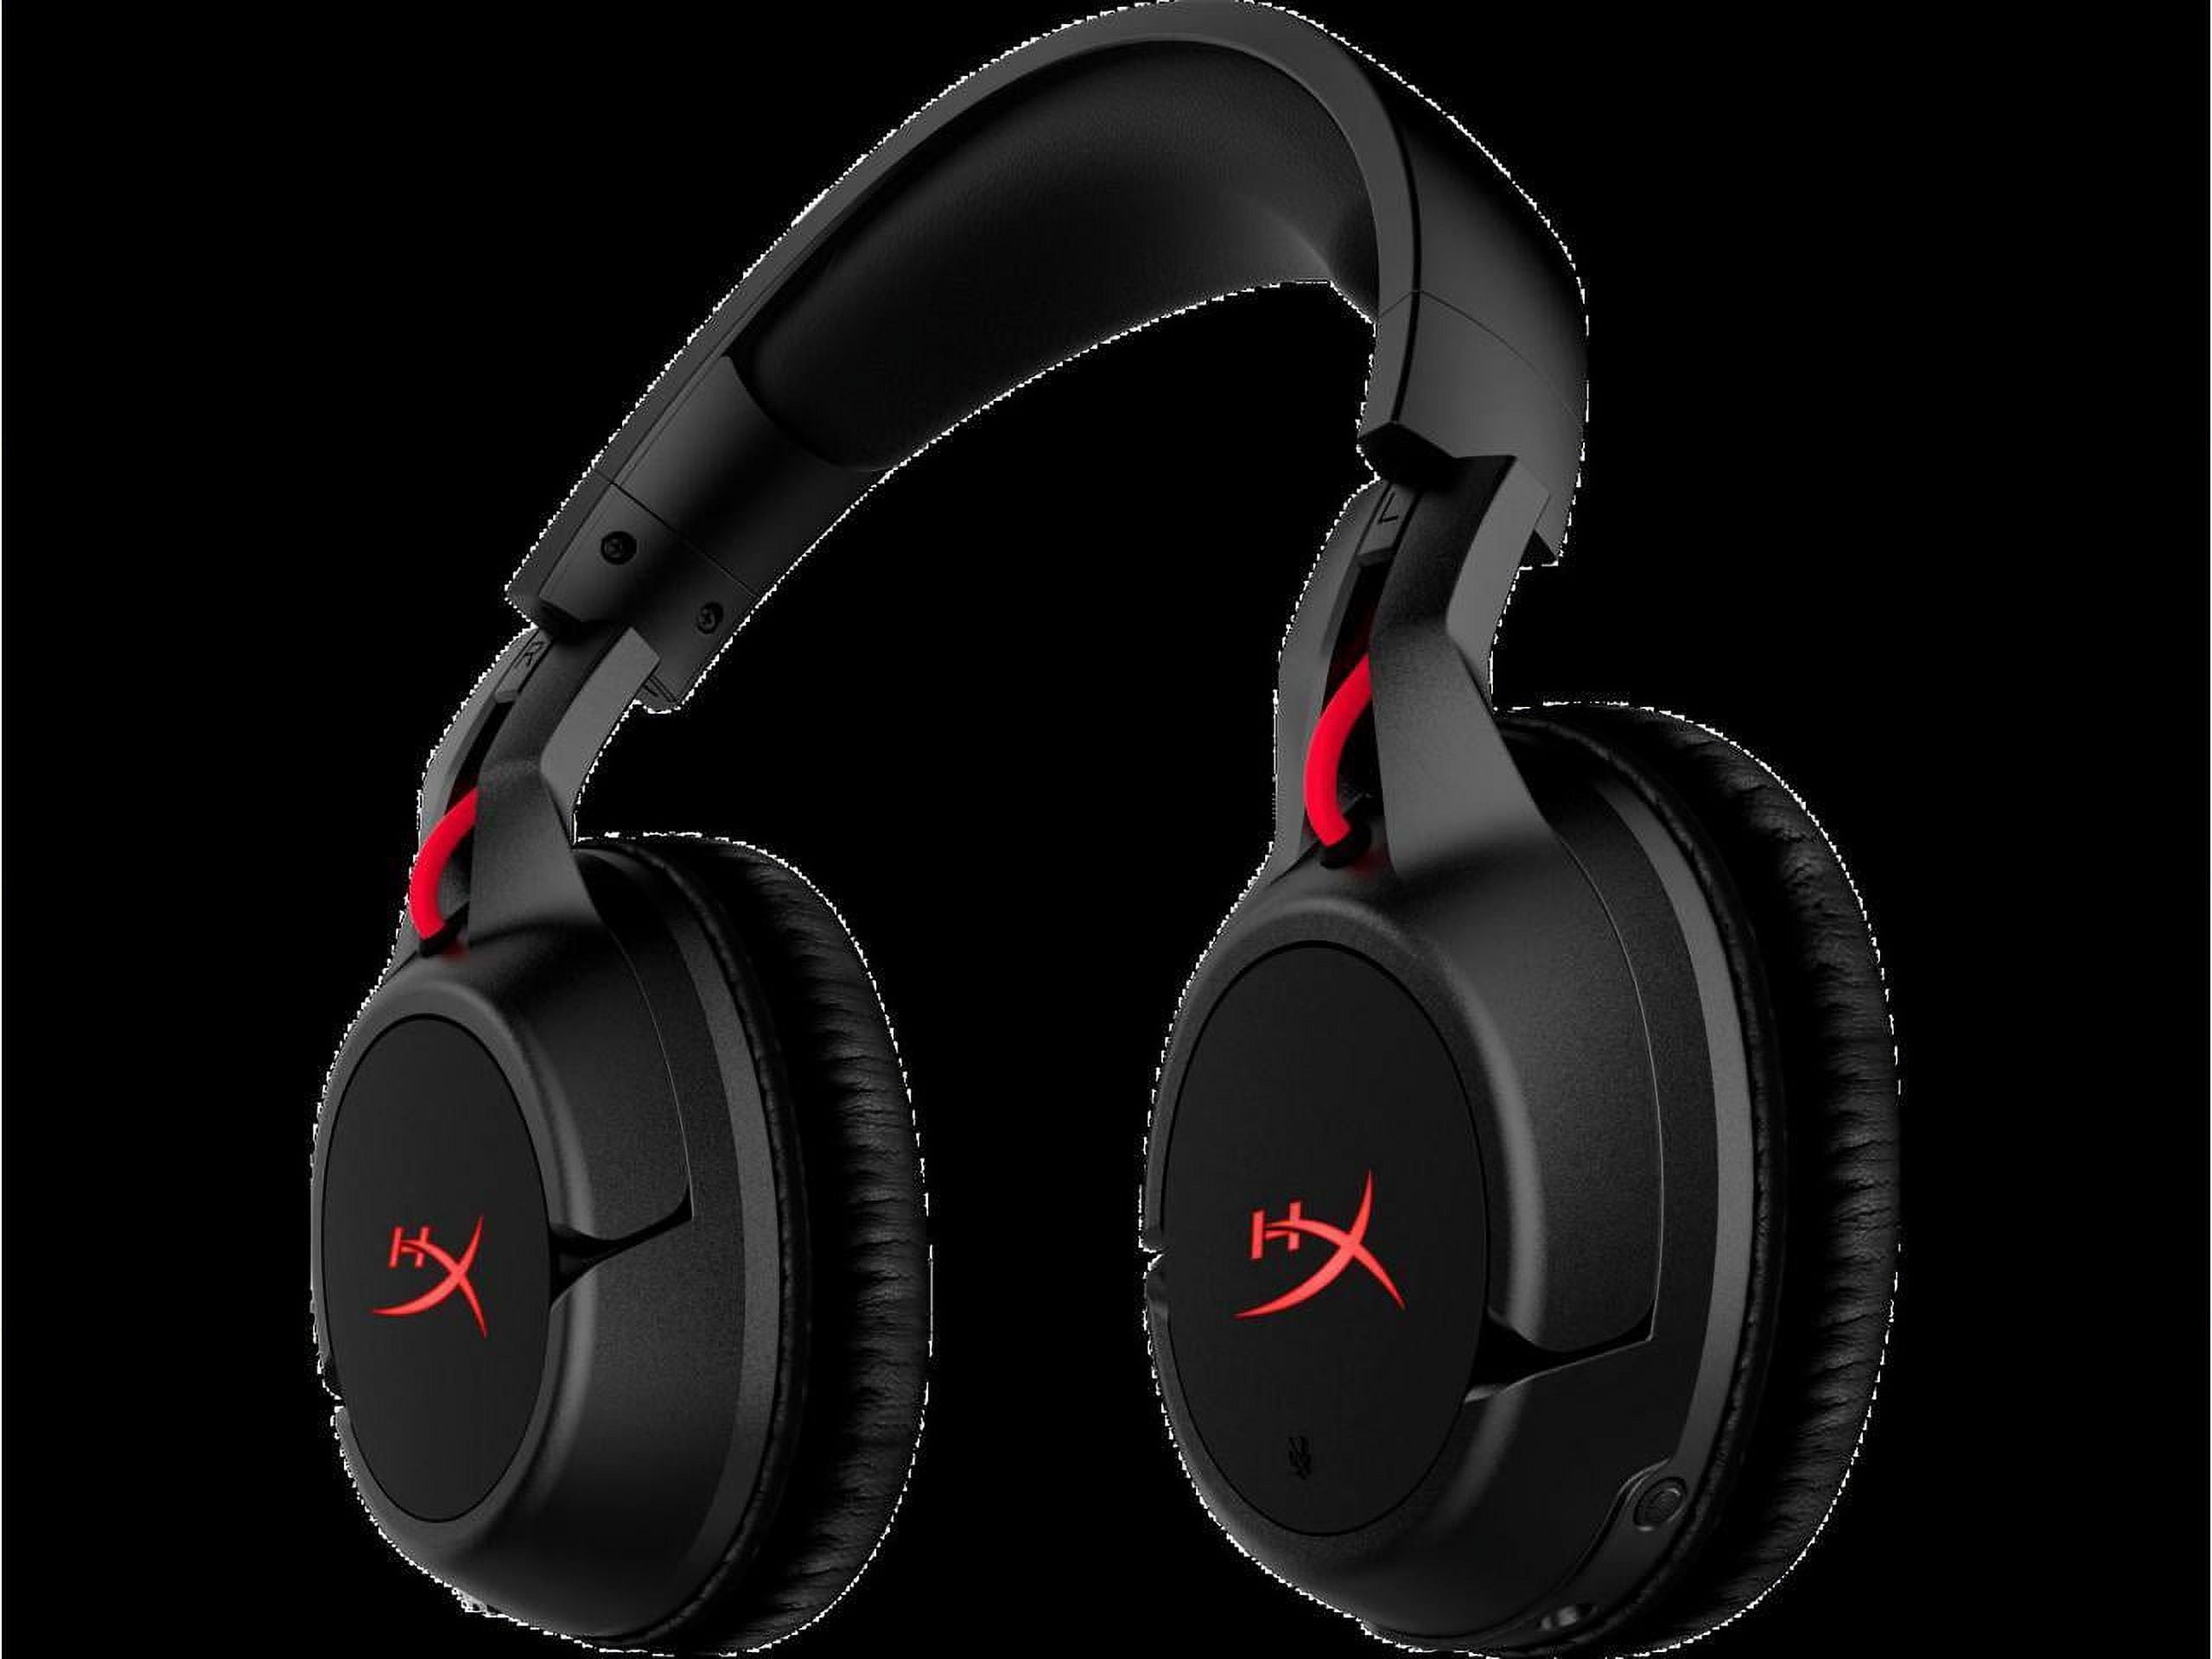  HyperX Cloud Flight - Wireless Gaming Headset, Long Lasting  Battery up to 30 Hours, Detachable Noise Cancelling Microphone, Red LED  Light, Comfortable Memory Foam, Works with PC, PS4 & PS5 